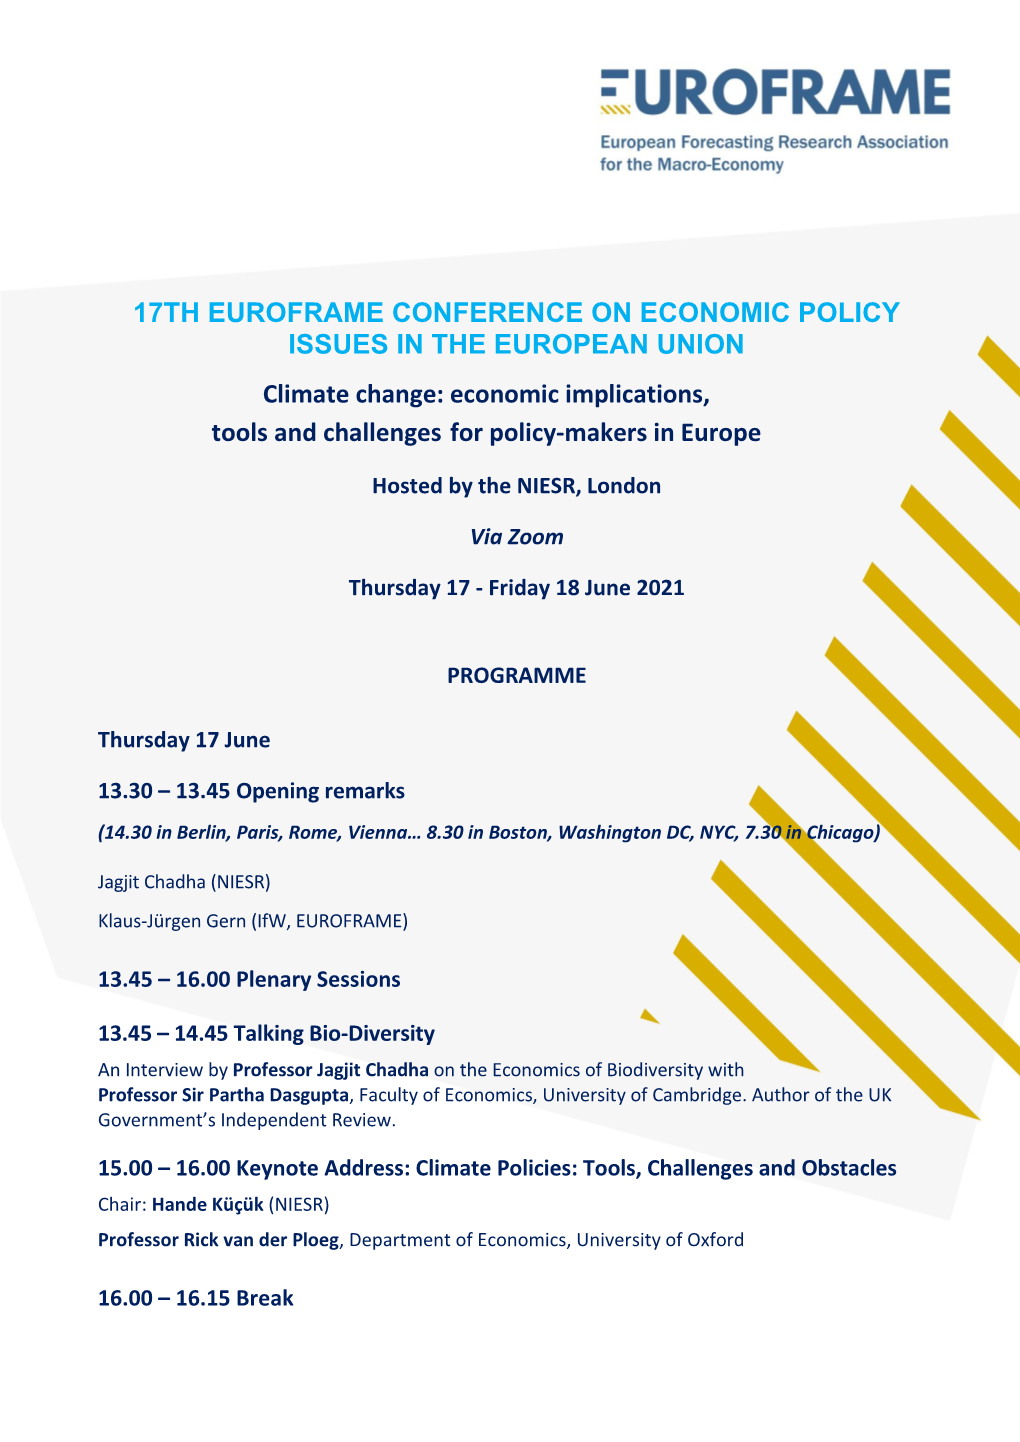 17TH EUROFRAME CONFERENCE on ECONOMIC POLICY ISSUES in the EUROPEAN UNION Climate Change: Economic Implications, Tools and Challenges for Policy-Makers in Europe